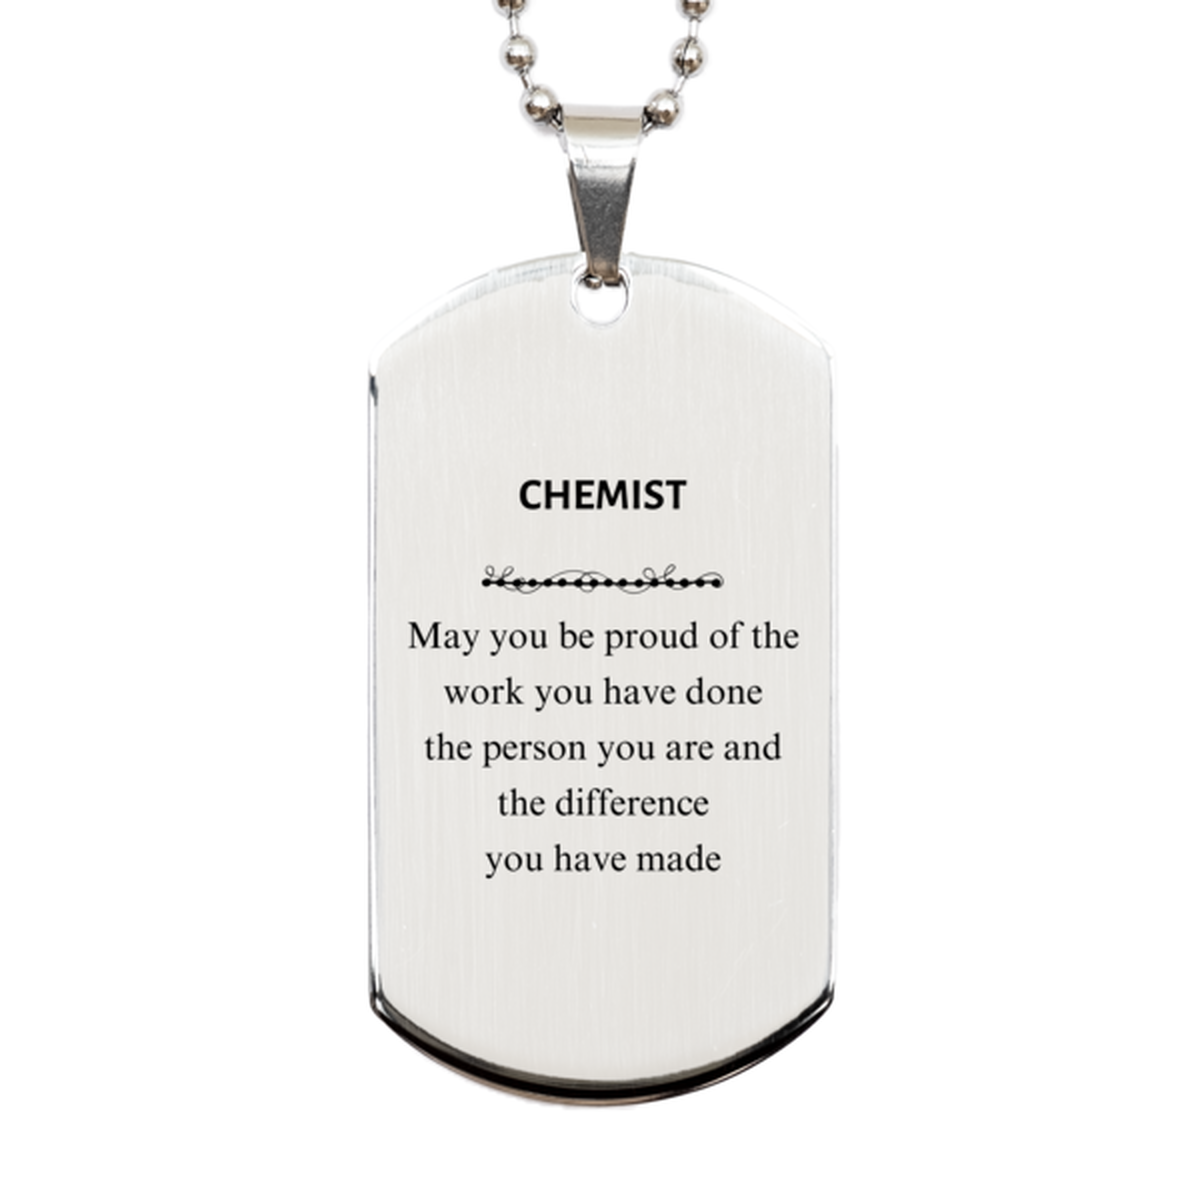 Chemist May you be proud of the work you have done, Retirement Chemist Silver Dog Tag for Colleague Appreciation Gifts Amazing for Chemist